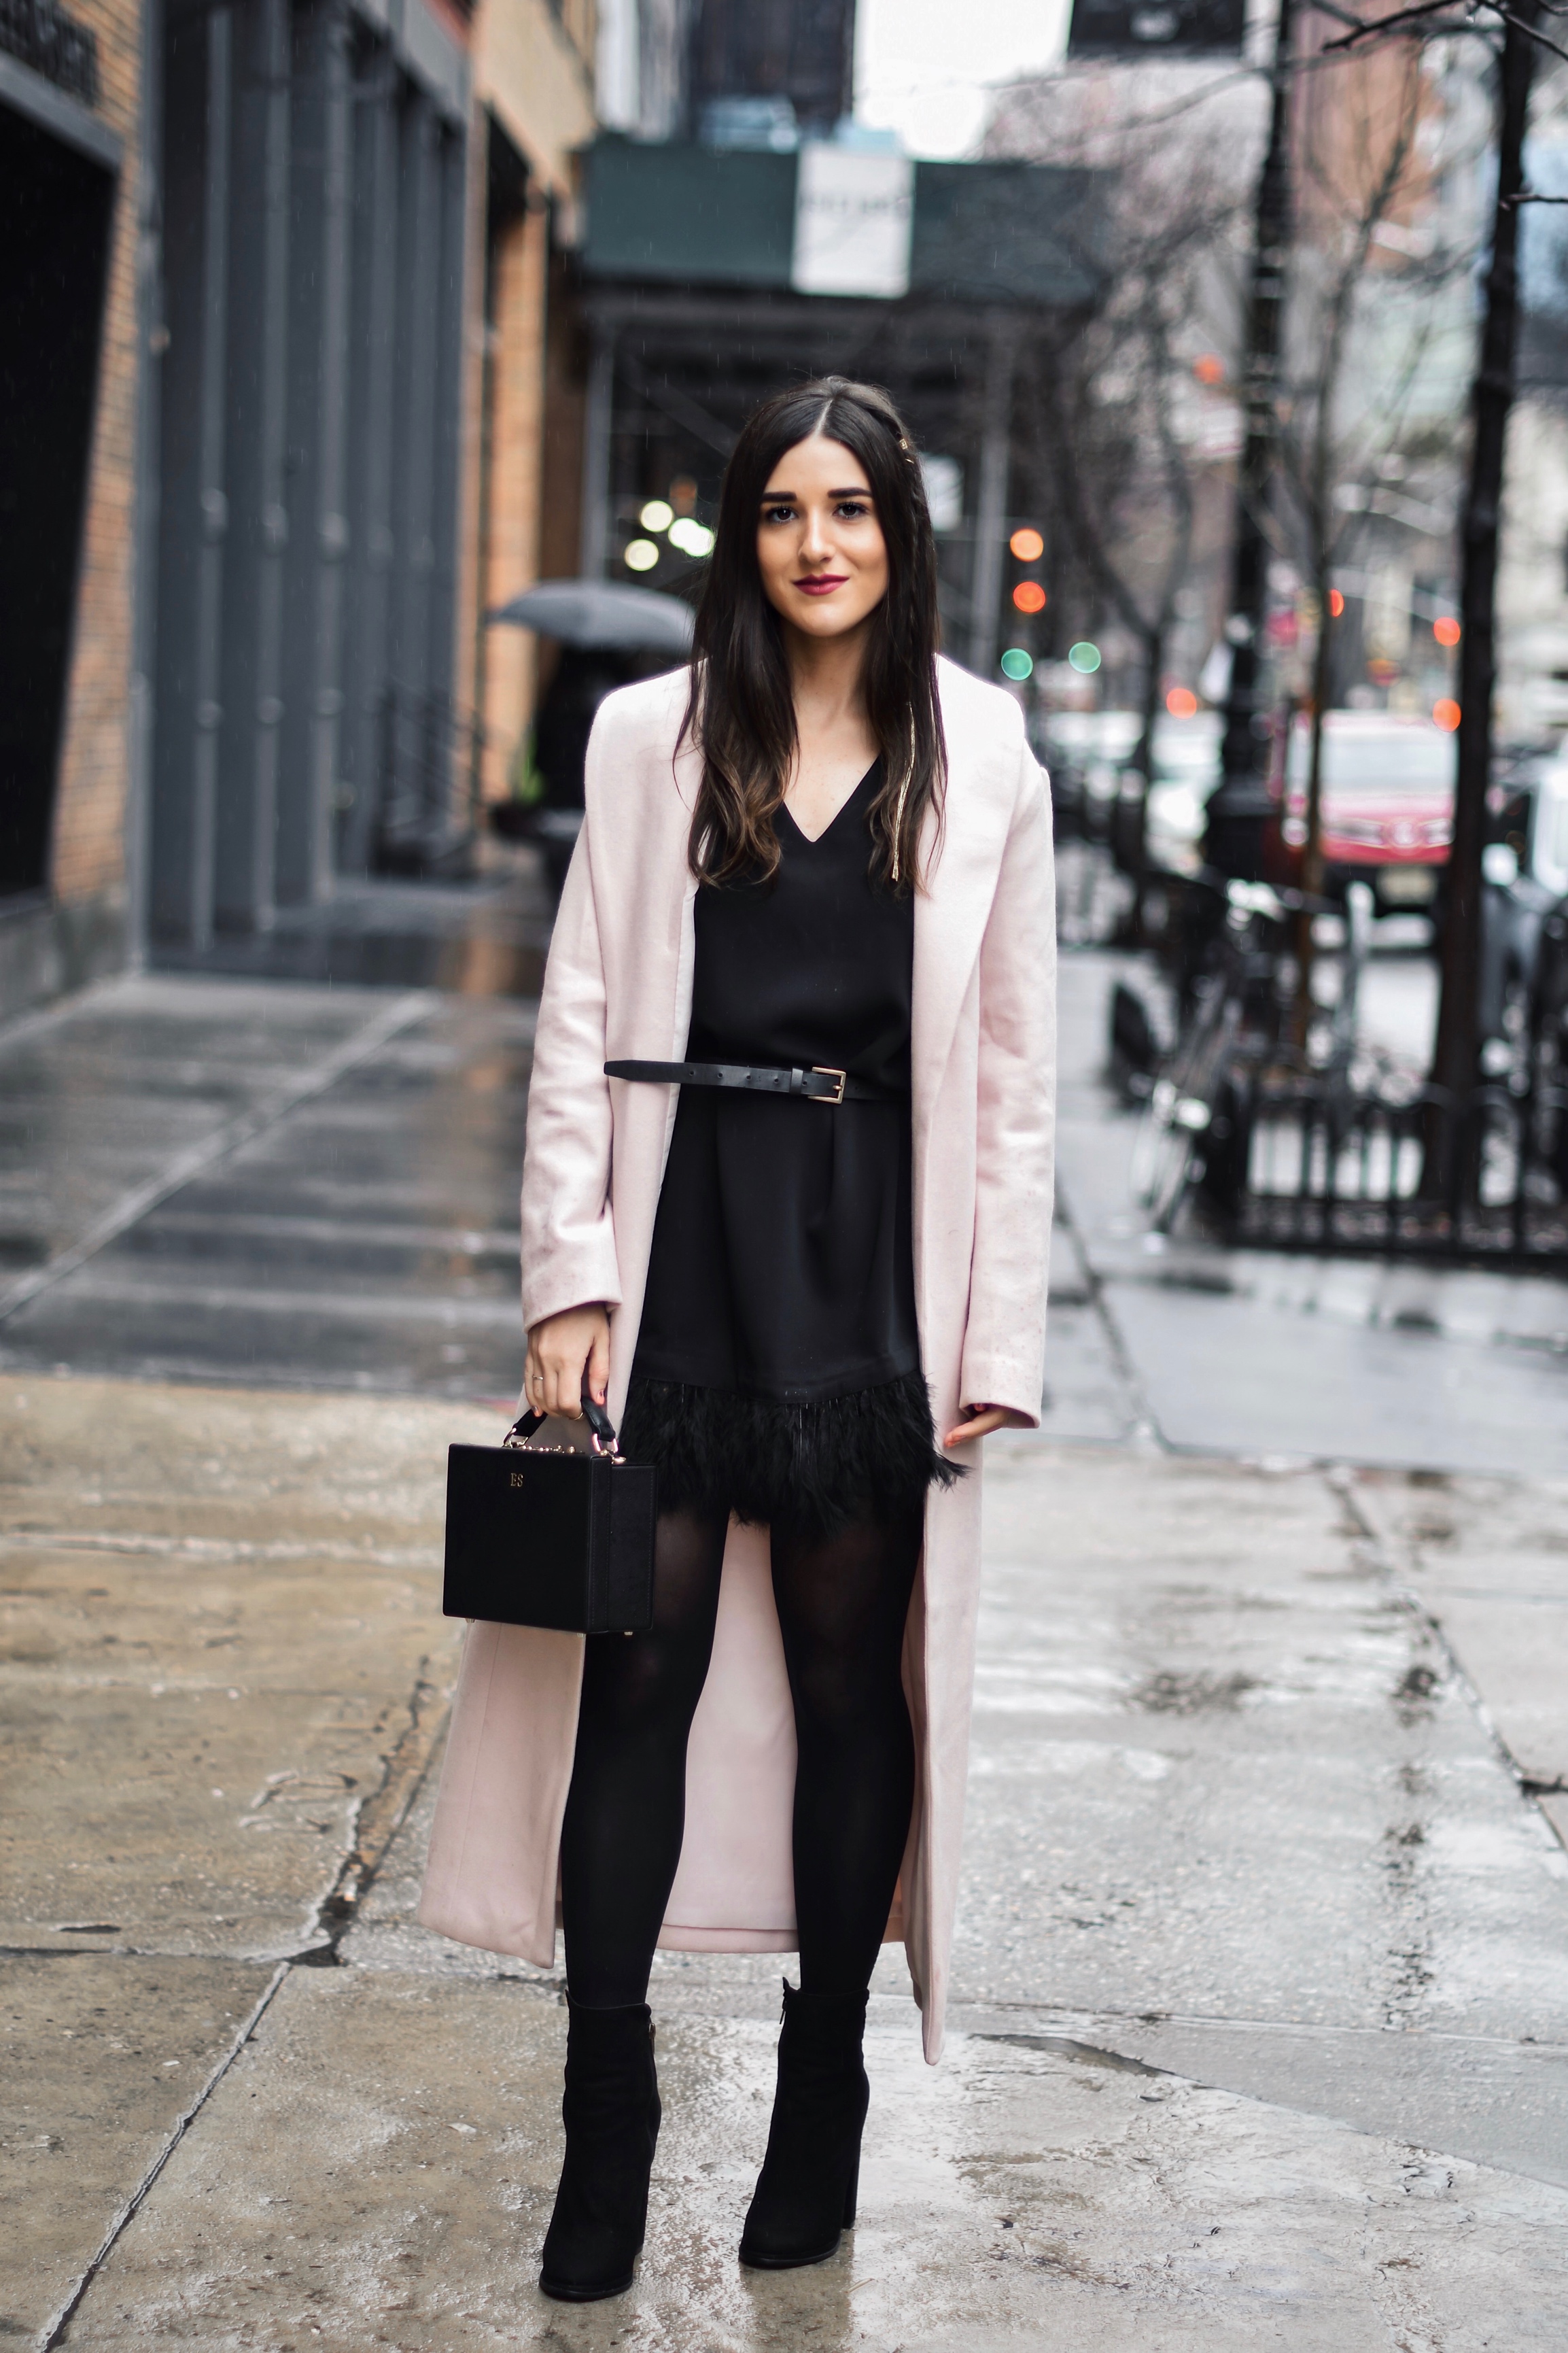 How To Stay Grounded // Black Feather Trim Dress + Long Pink Coat